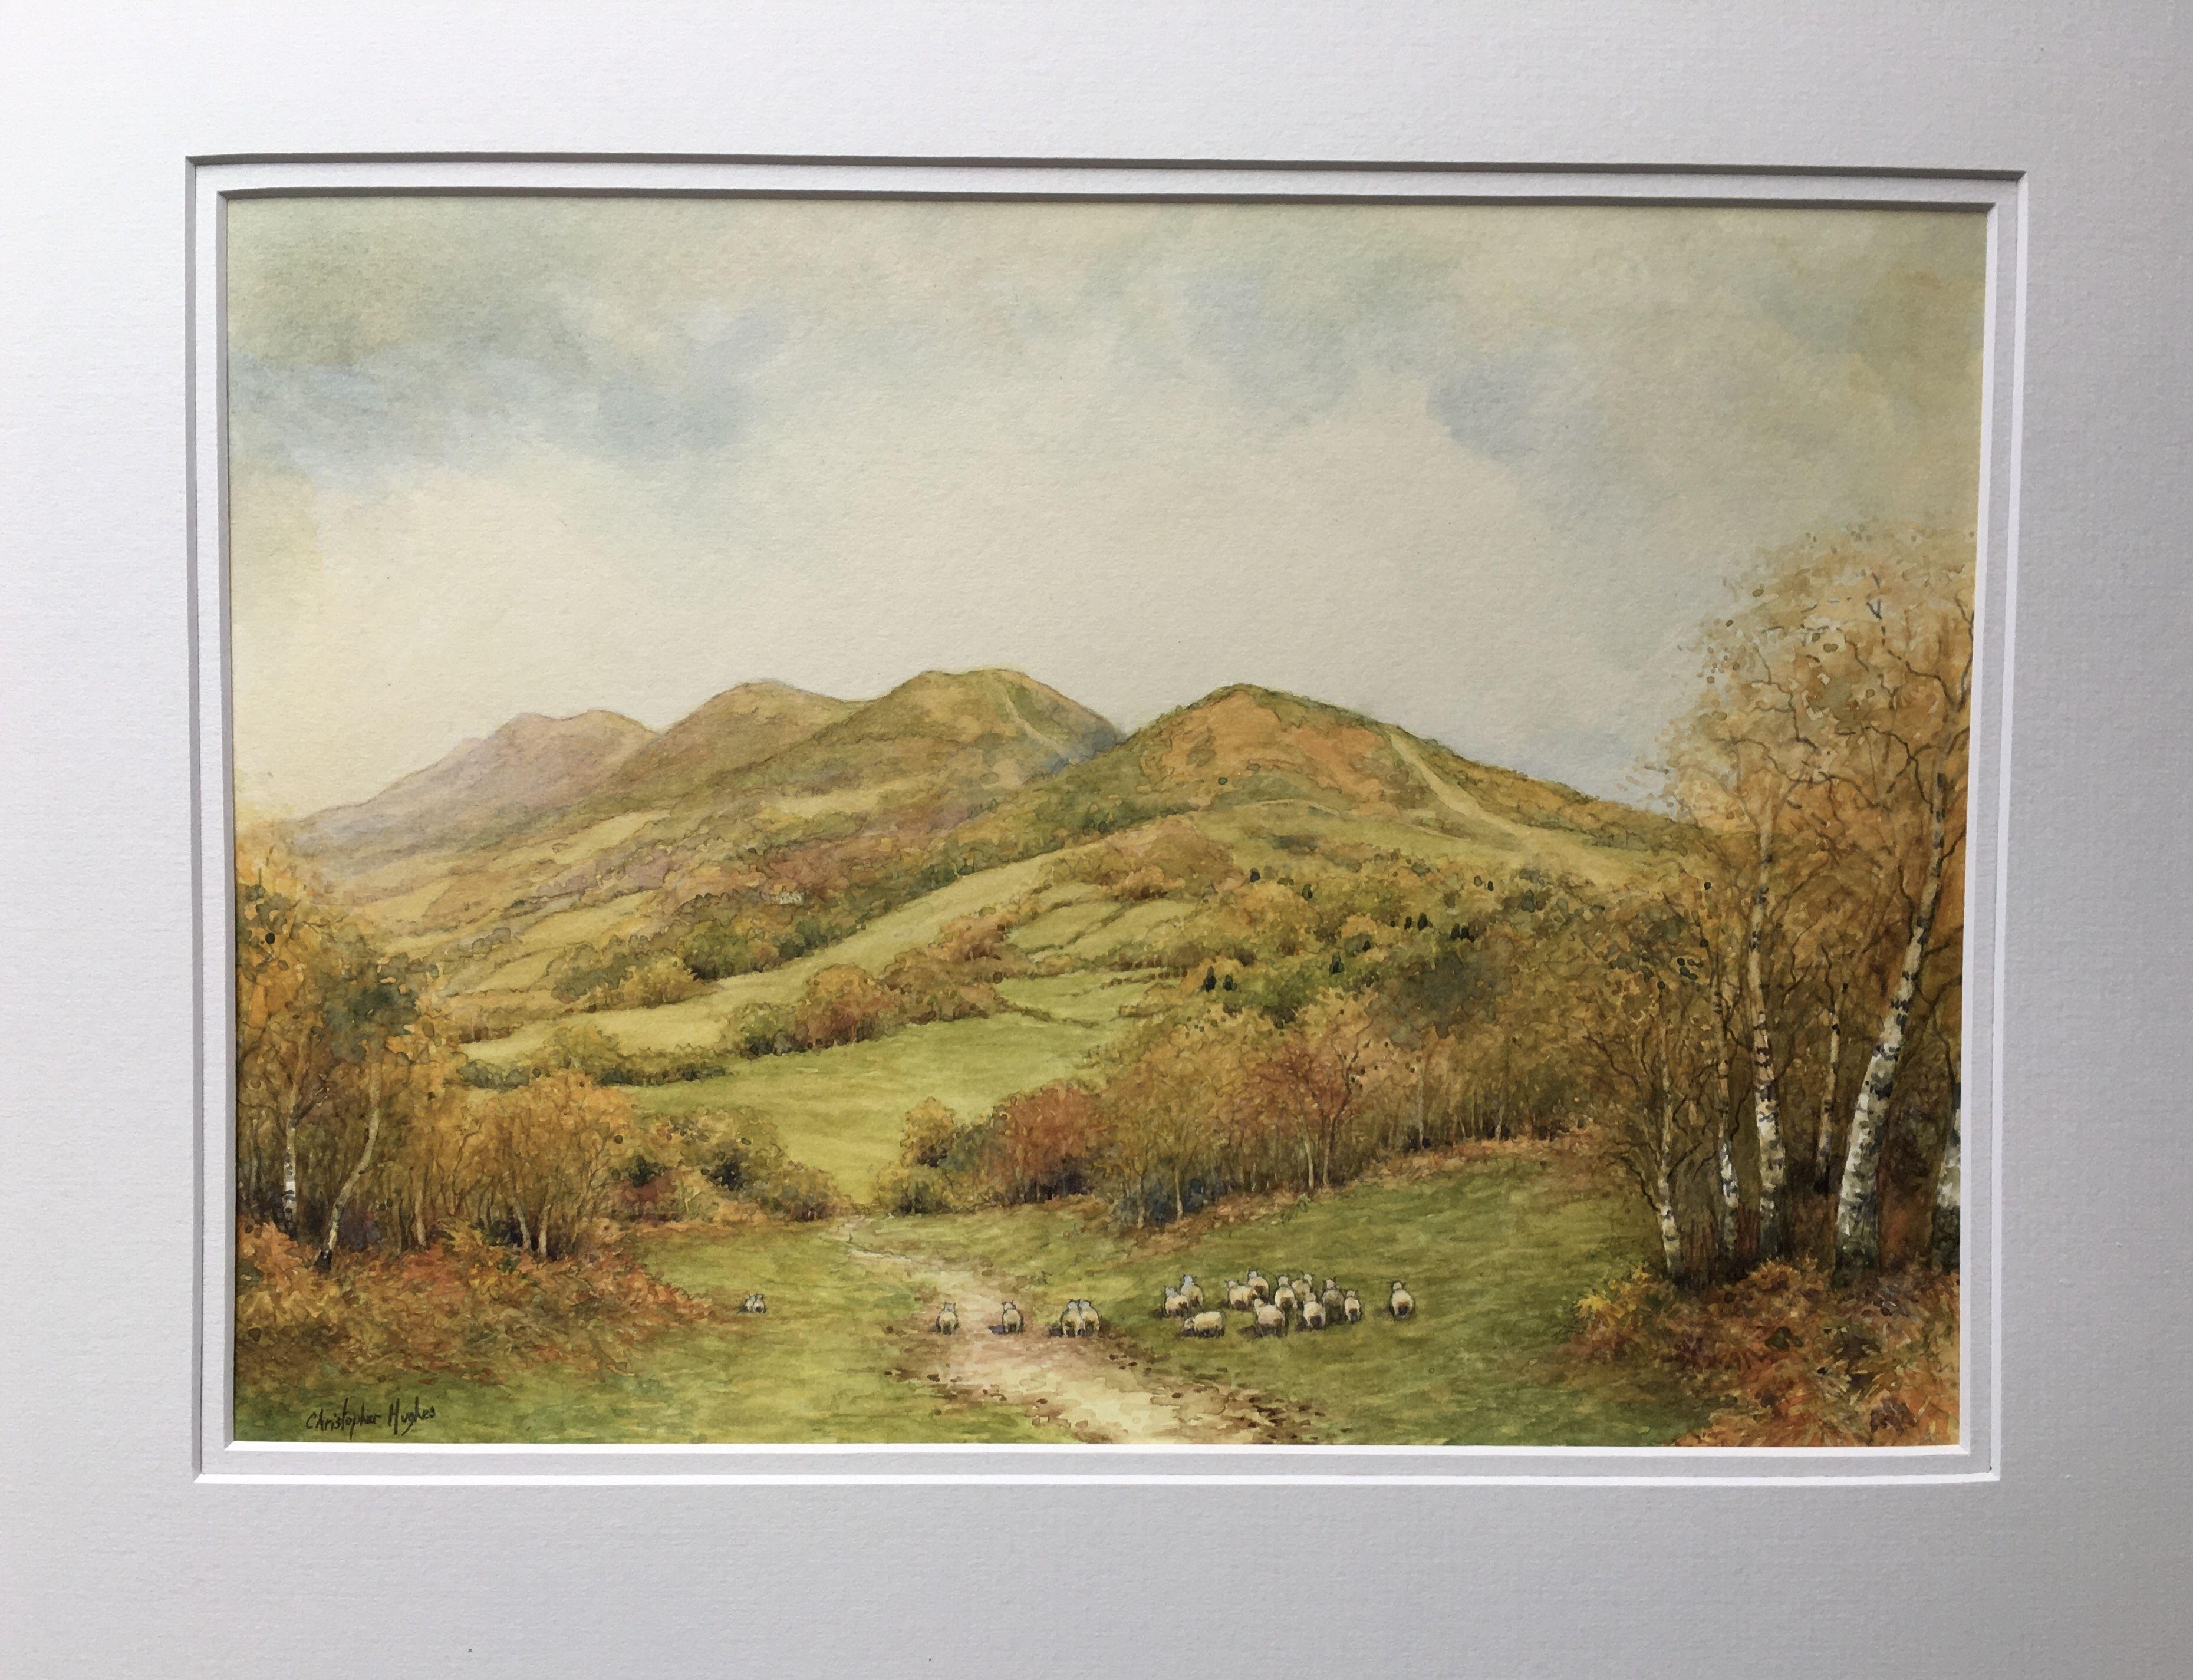 Malvern Hills in Autumn, Painting, Watercolor on Watercolor Paper - Realist Art by Christopher Hughes